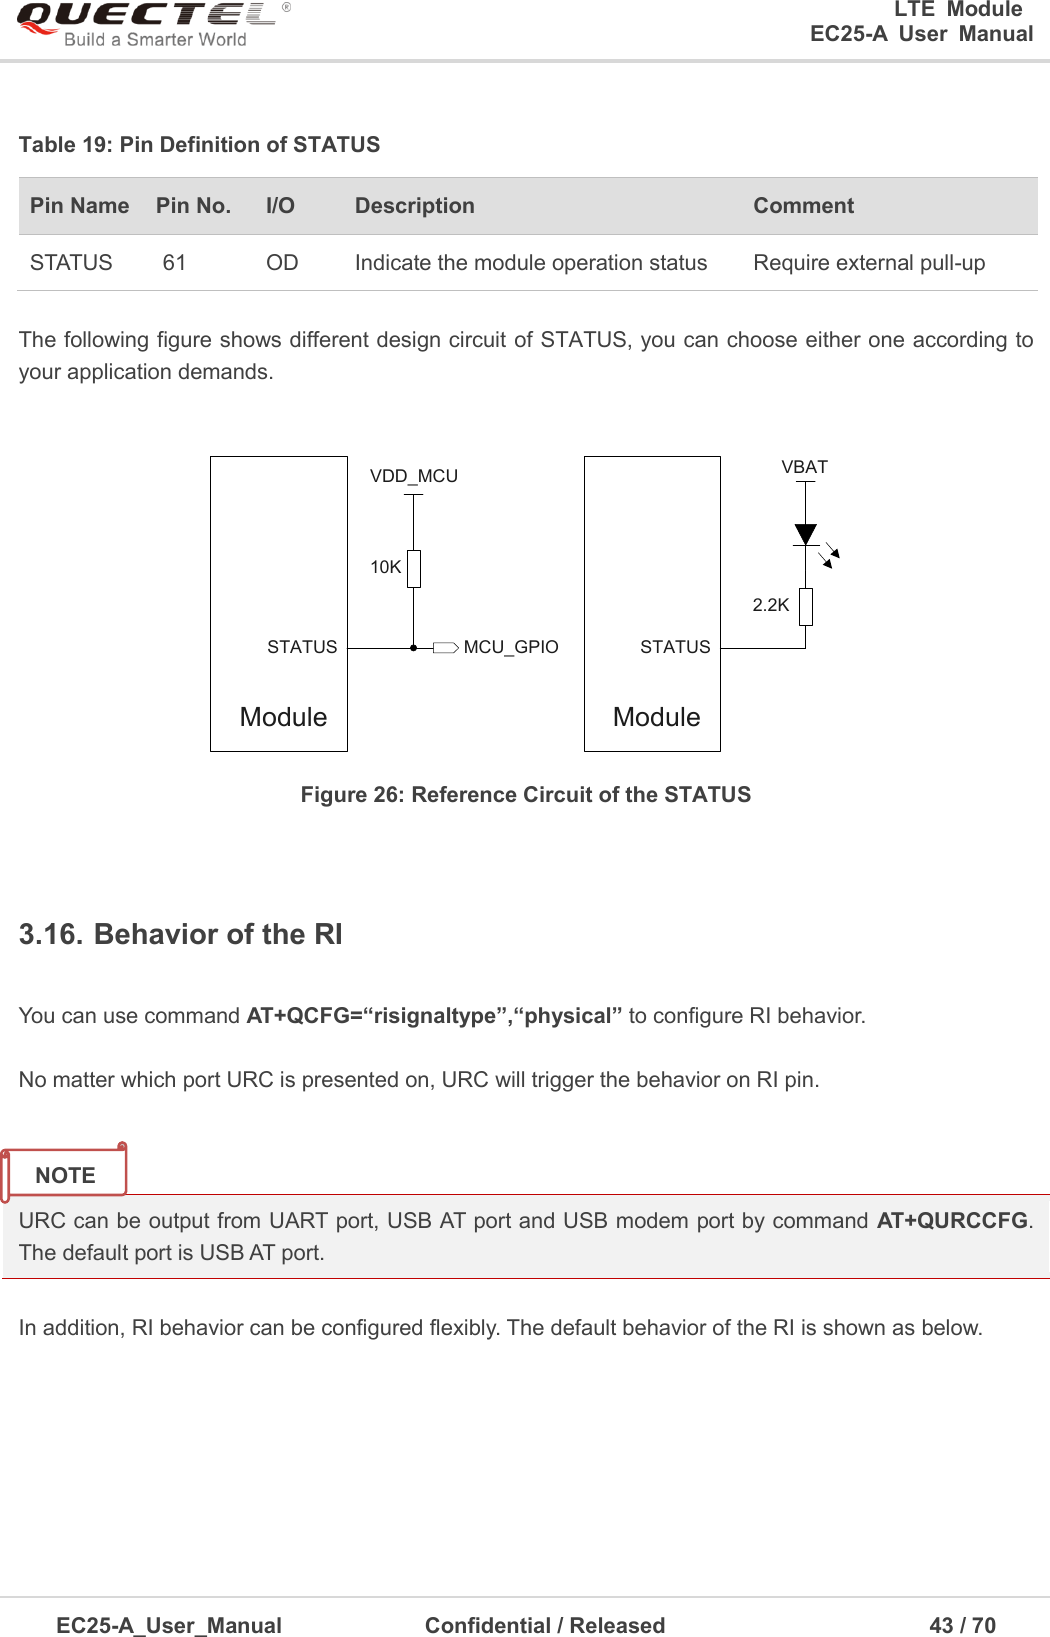 0                                                                       LTE  Module                                                    EC25-A  User  Manual  EC25-A_User_Manual               Confidential / Released                                            43 / 7      Table 19: Pin Definition of STATUS Pin Name   Pin No. I/O Description   Comment STATUS 61 OD Indicate the module operation status Require external pull-up  The following figure shows different design circuit of STATUS, you can choose either one according to your application demands.  VDD_MCU10KModuleSTATUS MCU_GPIOModuleSTATUSVBAT2.2K Figure 26: Reference Circuit of the STATUS  3.16. Behavior of the RI  You can use command AT+QCFG=“risignaltype”,“physical” to configure RI behavior.  No matter which port URC is presented on, URC will trigger the behavior on RI pin.   URC can be output from UART port, USB AT port and USB modem port by command AT+QURCCFG. The default port is USB AT port.  In addition, RI behavior can be configured flexibly. The default behavior of the RI is shown as below.    NOTE 